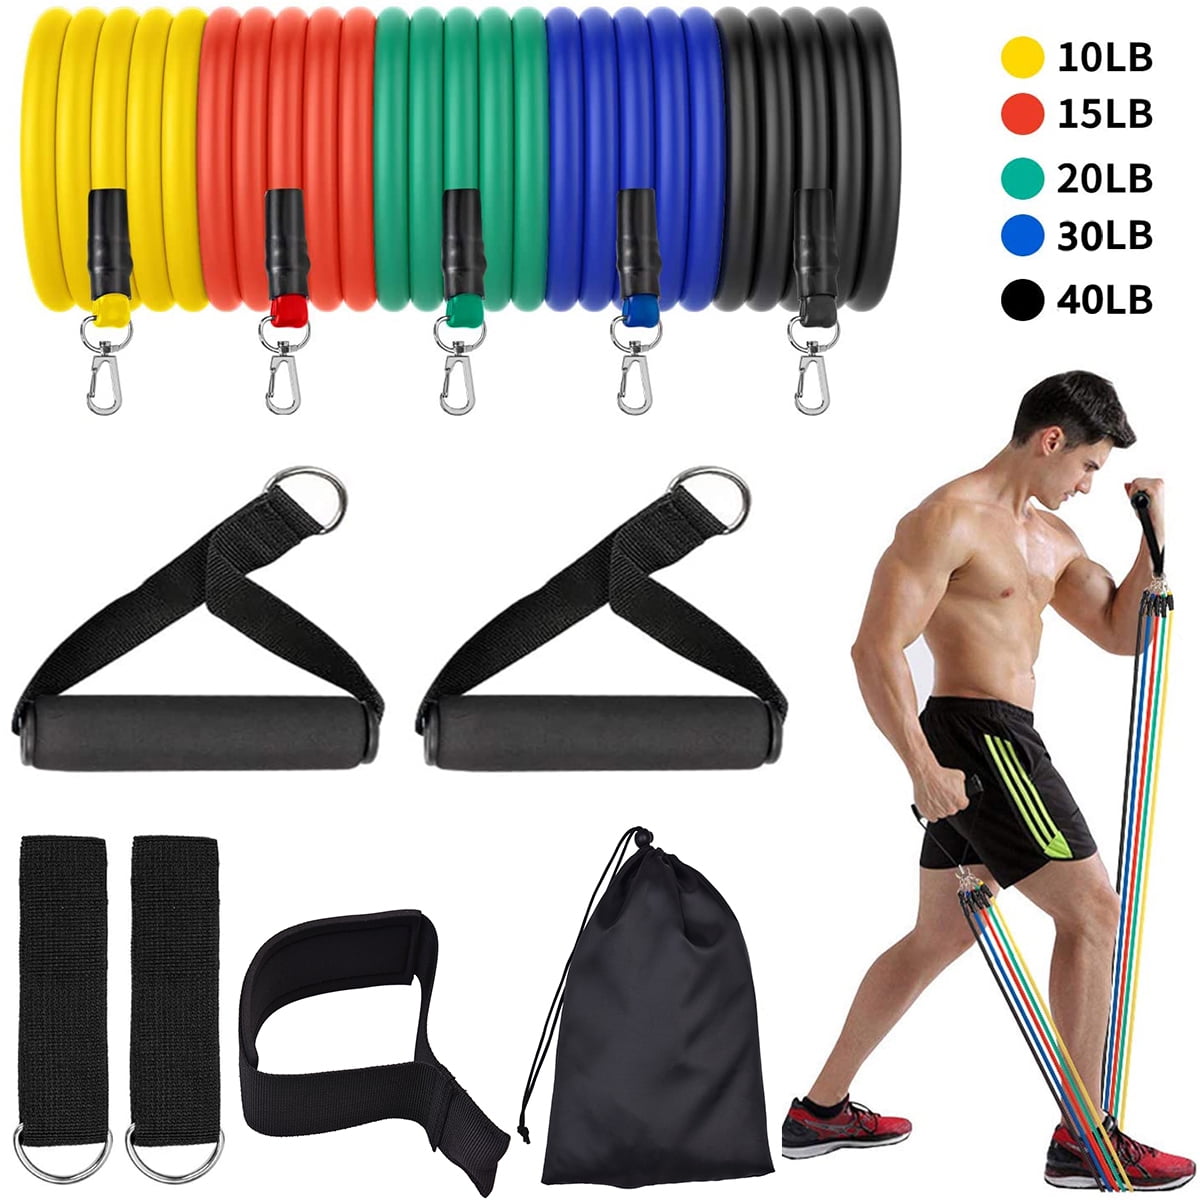 Carry Bag Leg and Yoga Handles Legs Ankle Straps,Perfect Muscle Builder for Arms Fekuar Resistance Bands Set ,2021 New Material up to 100LB,Exercise Bands Fitness with Door Anchor 11pcs